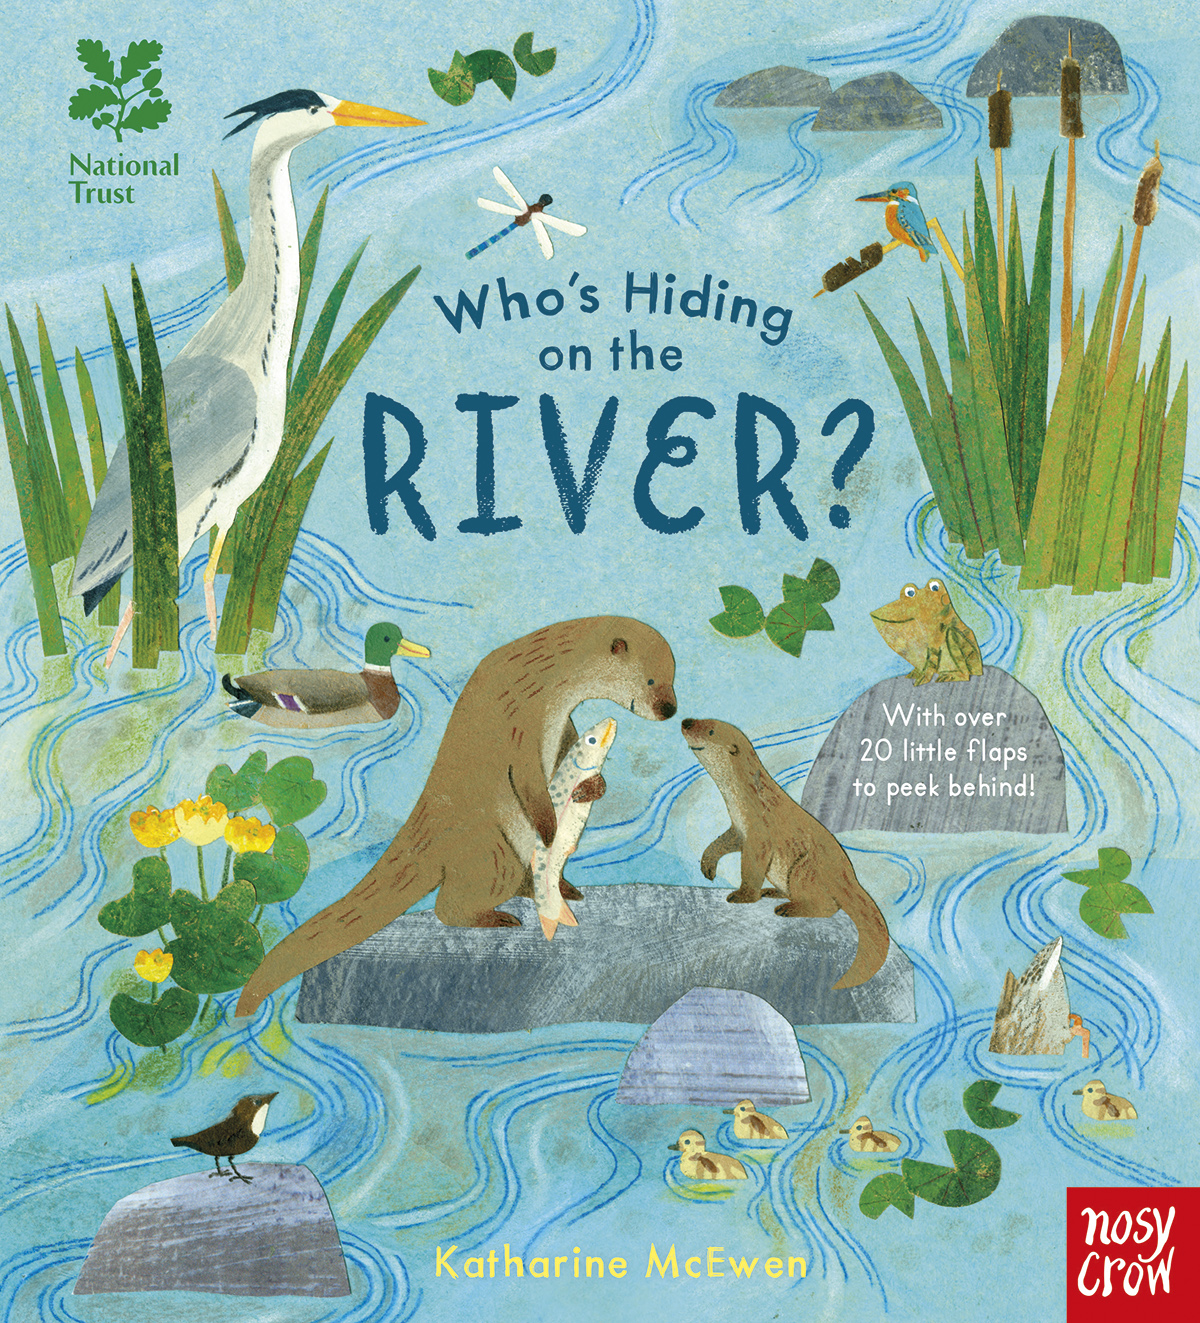 National Trust: Who's Hiding on the River?